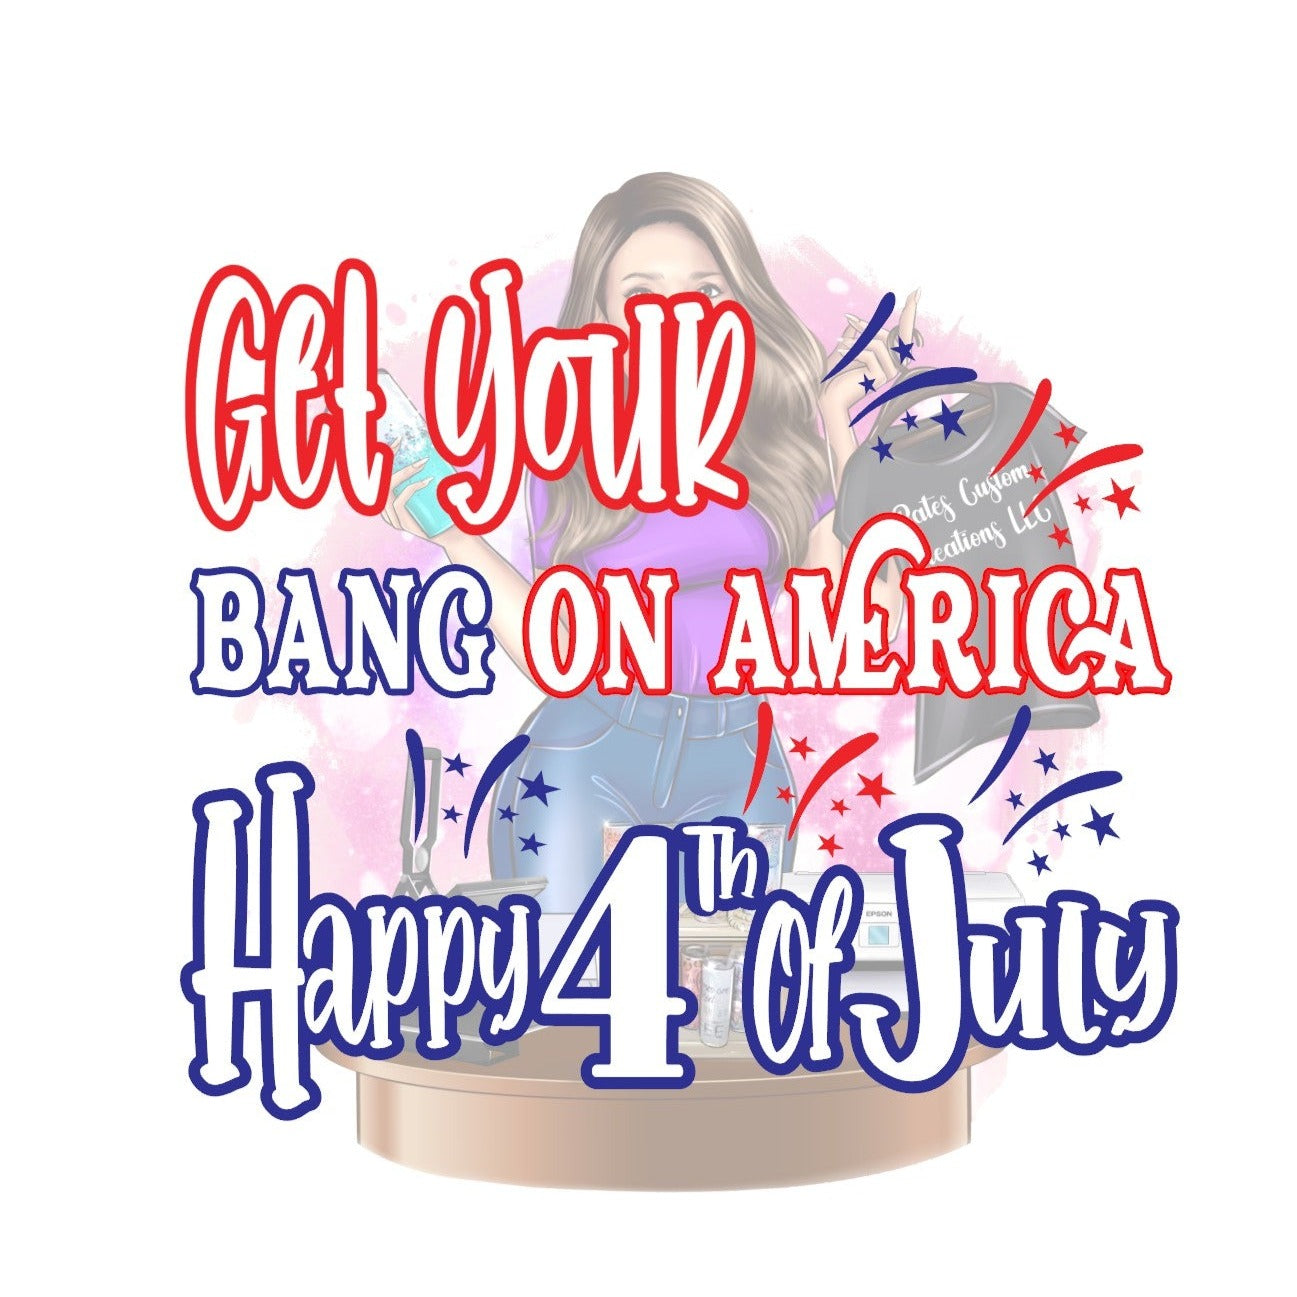 Get Your Bang On America